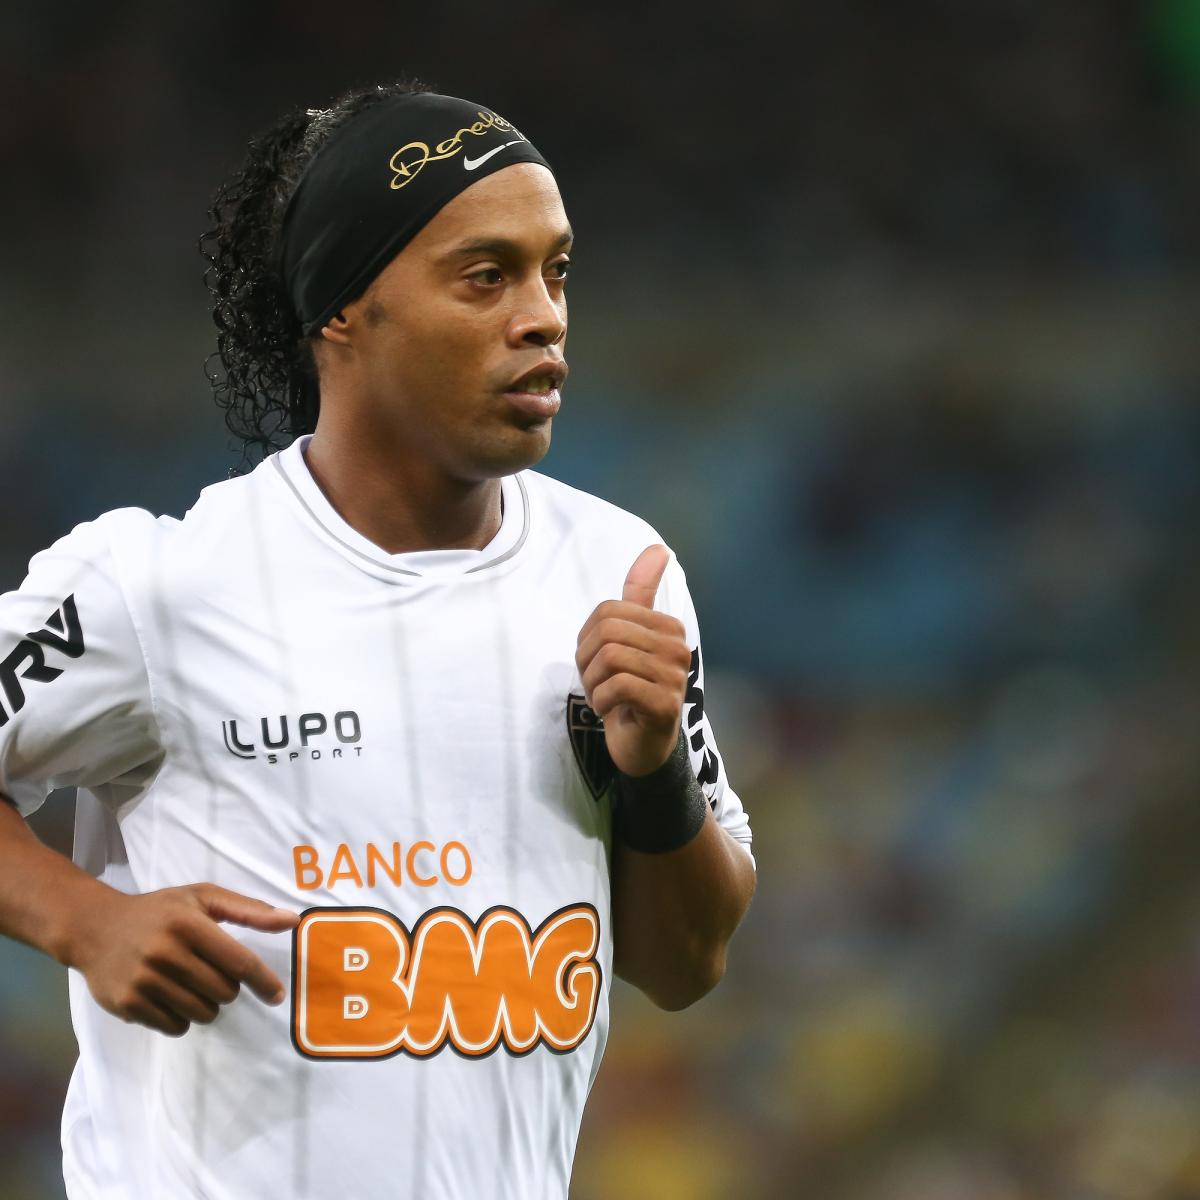 Ronaldinho signs 1-year extension with Atletico